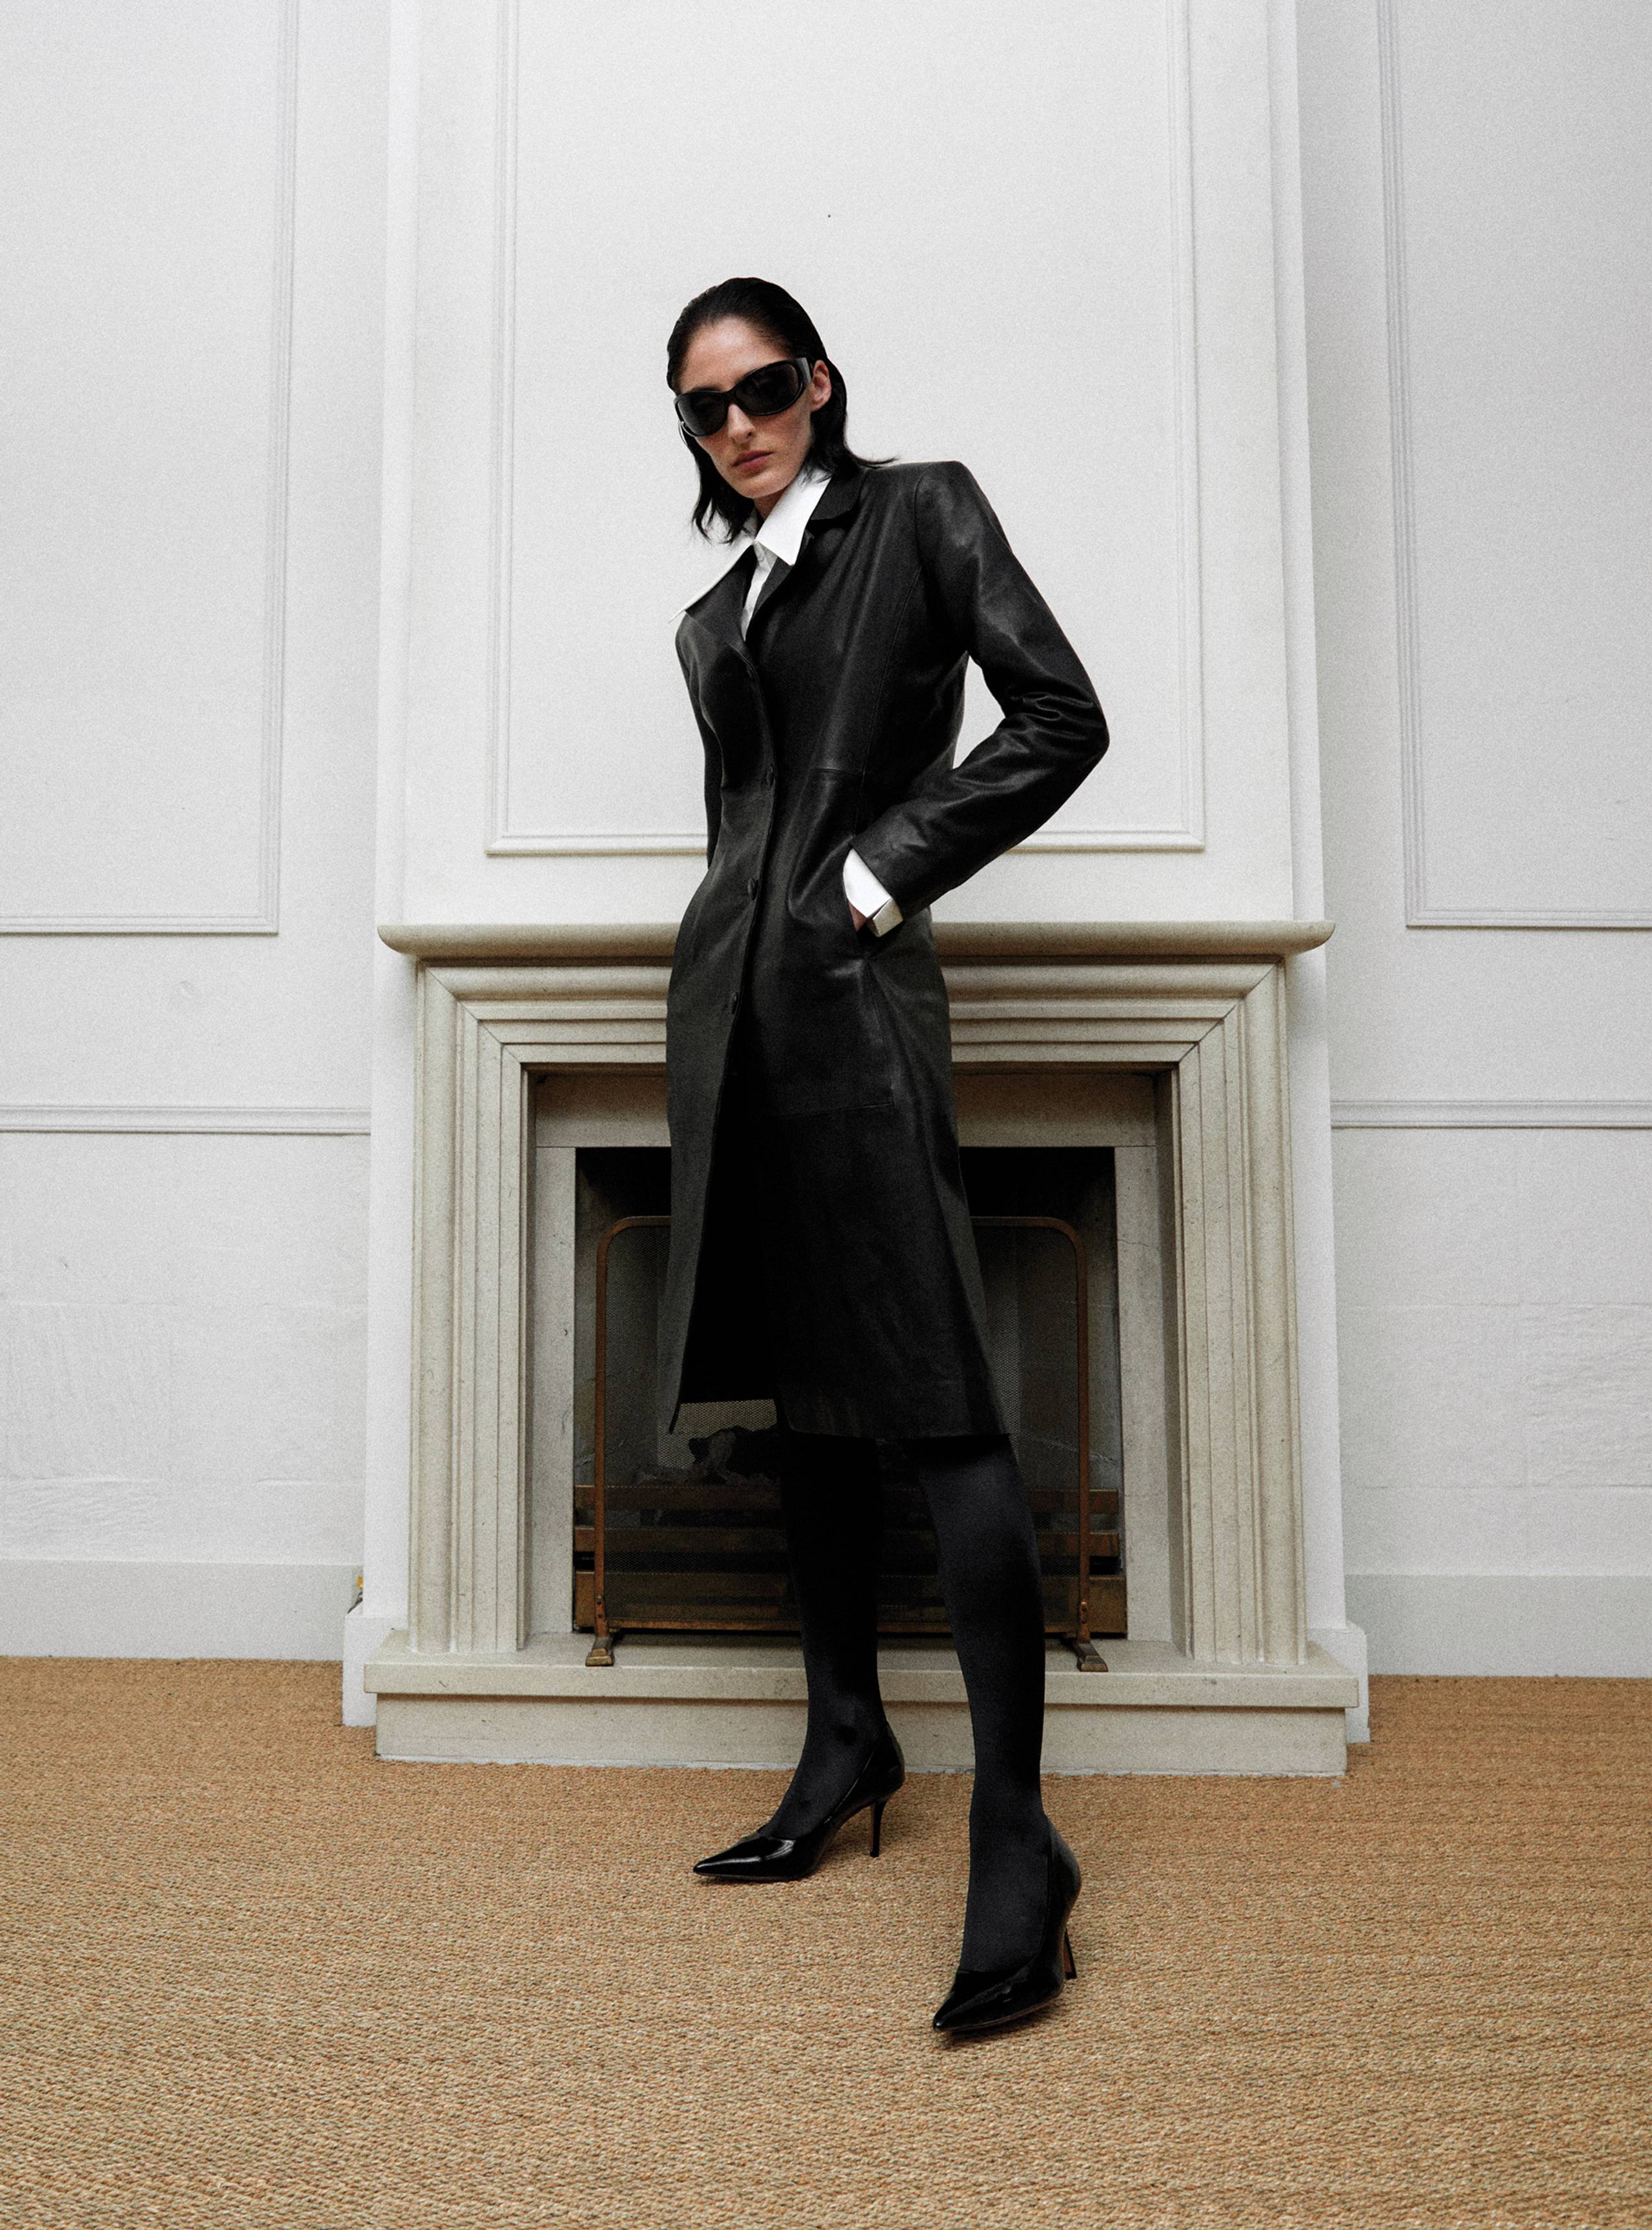 A model standing sideways wearing the Midnight Black long leather coat